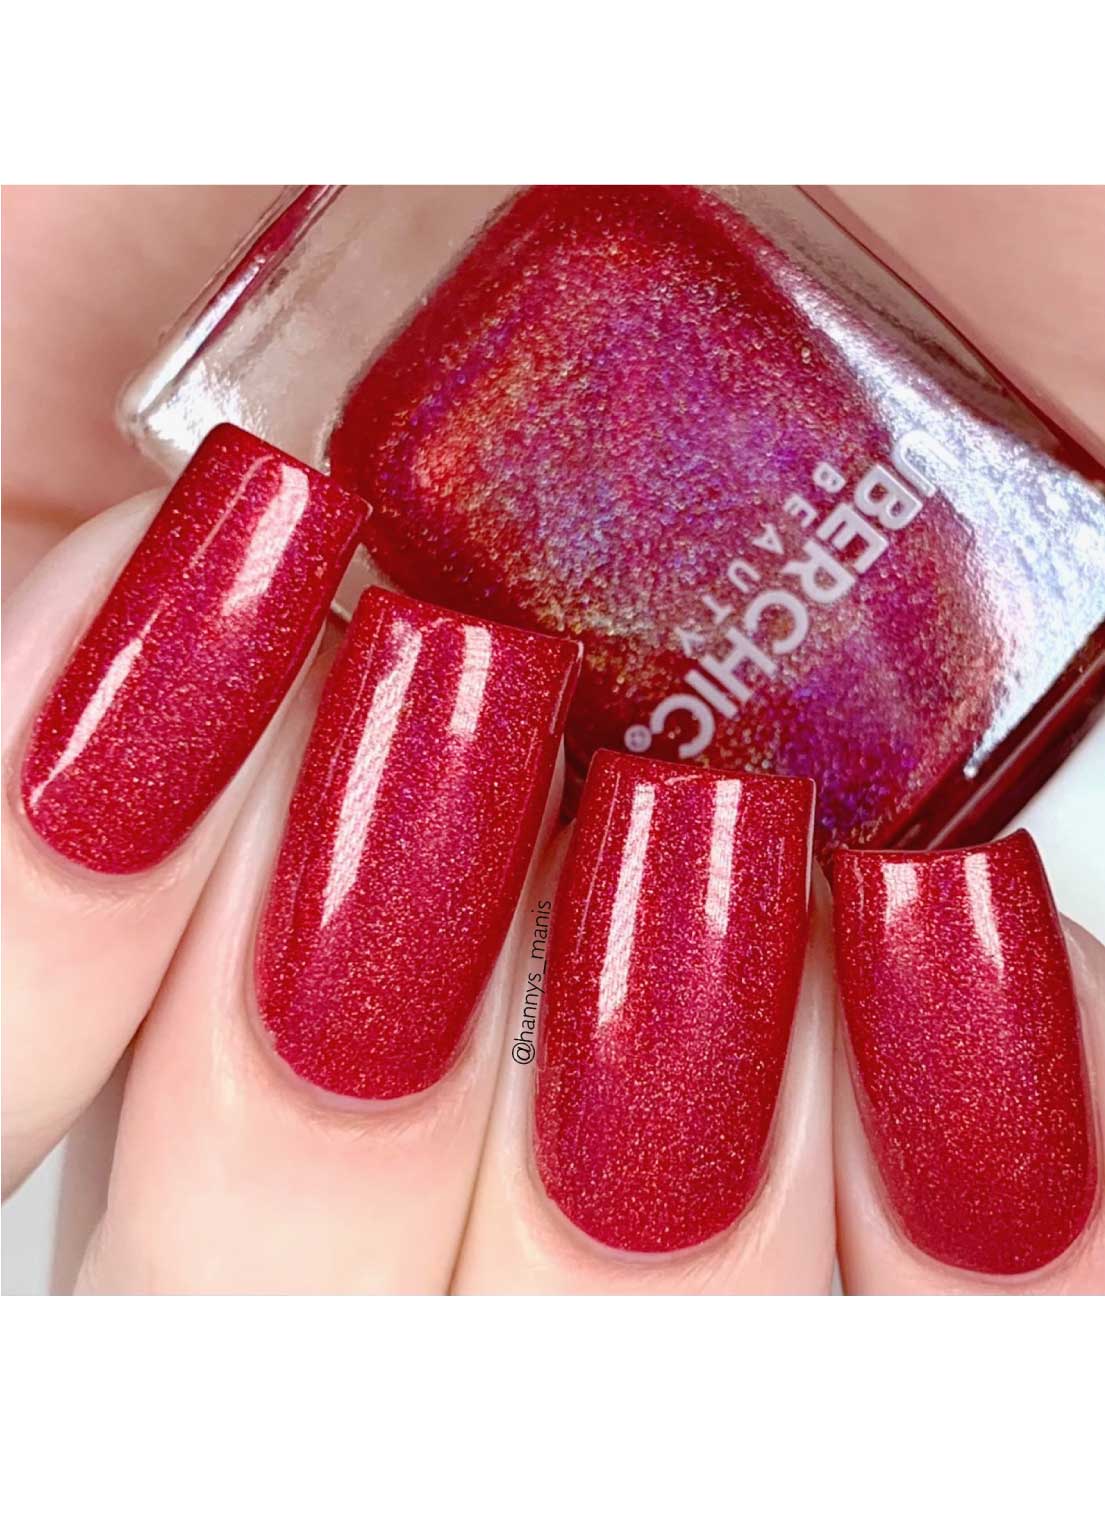 Buy Berry Color Nail Polish Online at Best Price - Iba Cosmetics